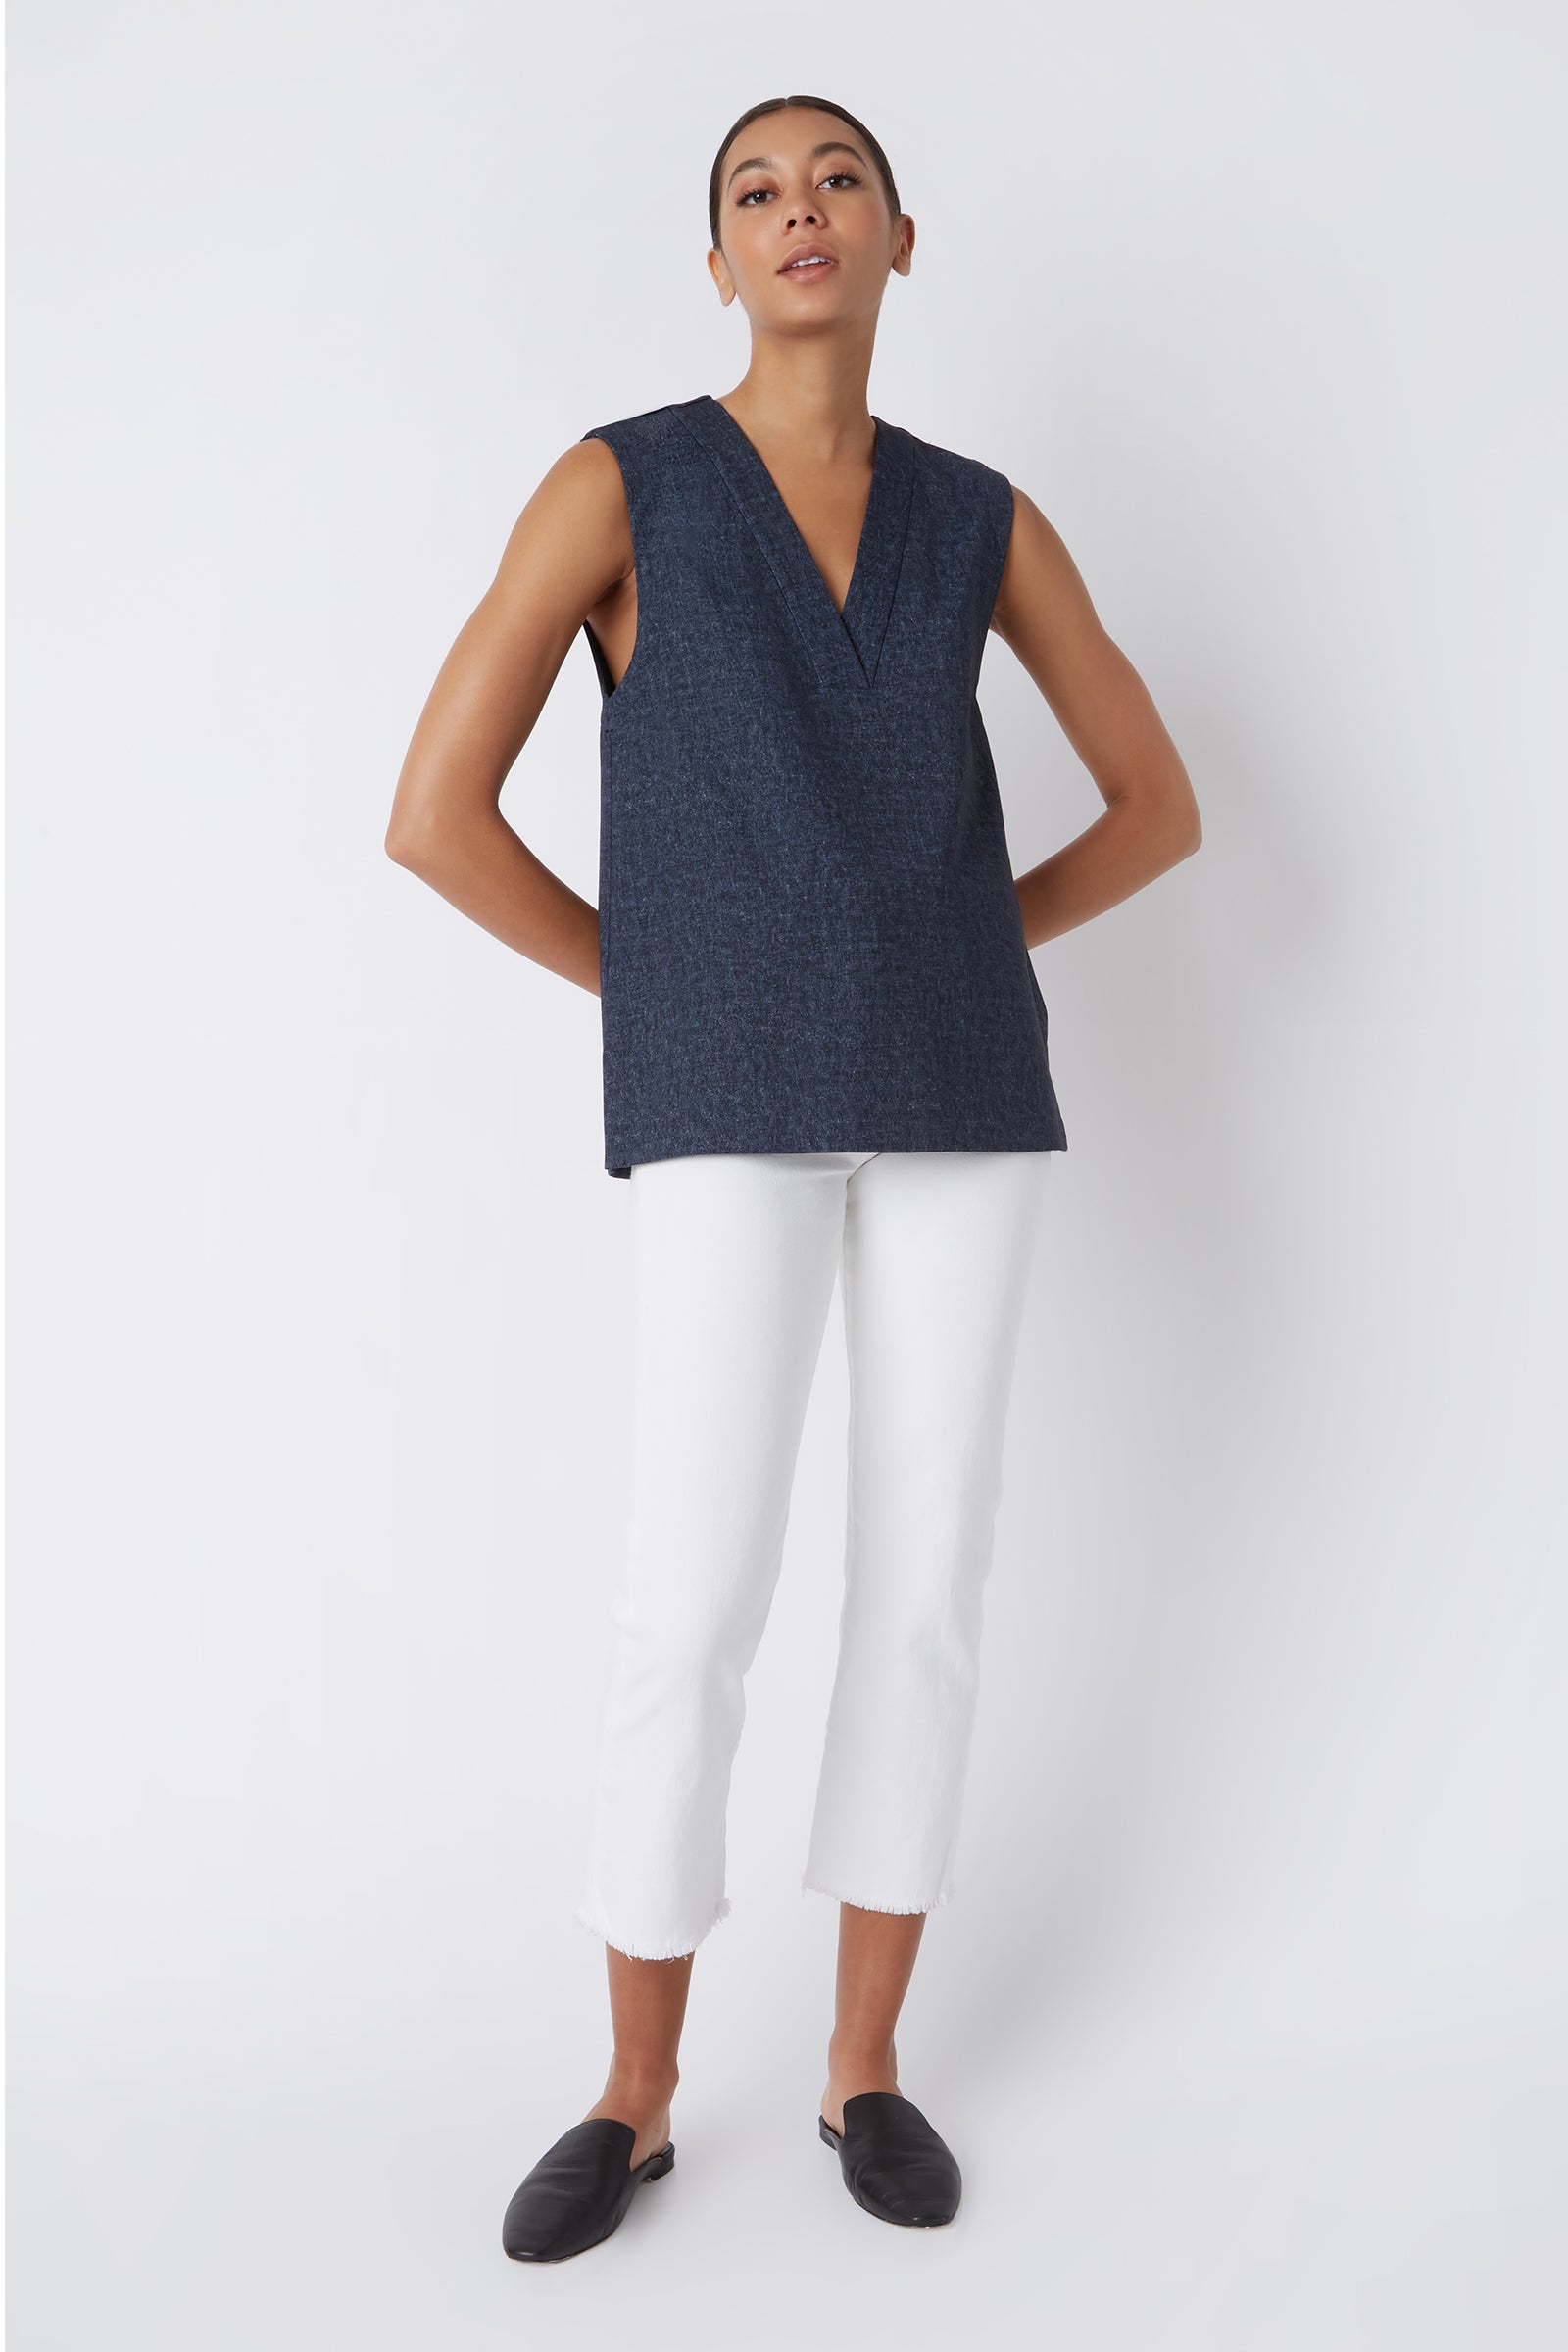 Kal Rieman Dustin Collared Vest in Navy Heather on Model with Hands Behind Back Full Front View